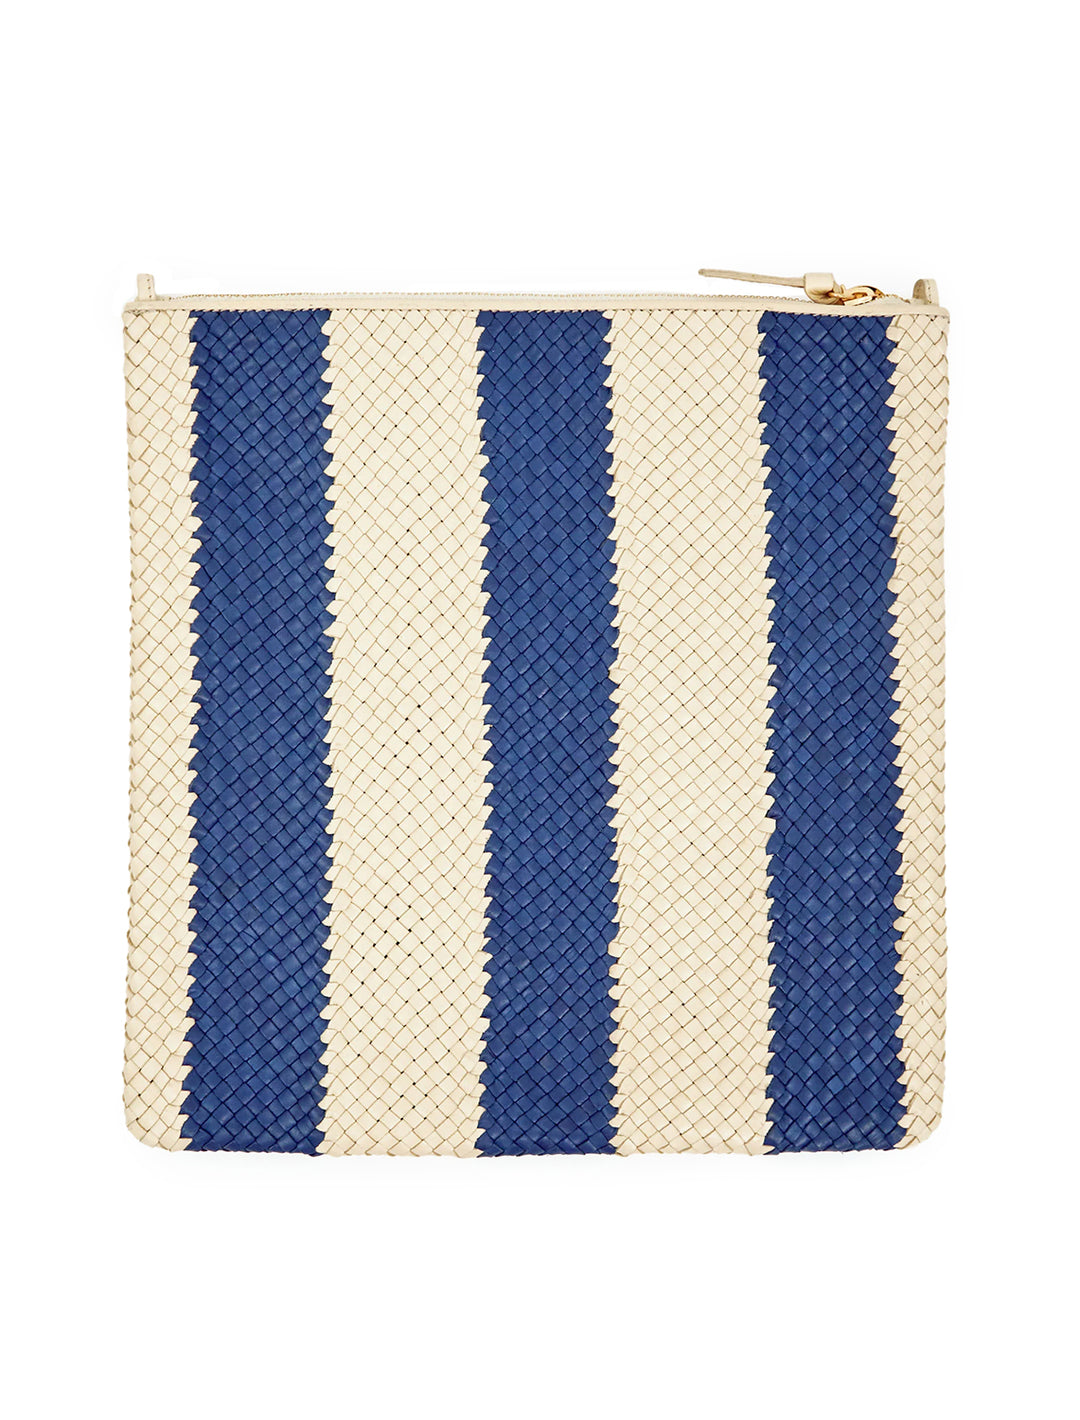 Front view of Clare V.'s foldover clutch with tabs in indigo and cream woven racing stripes, unfolded.